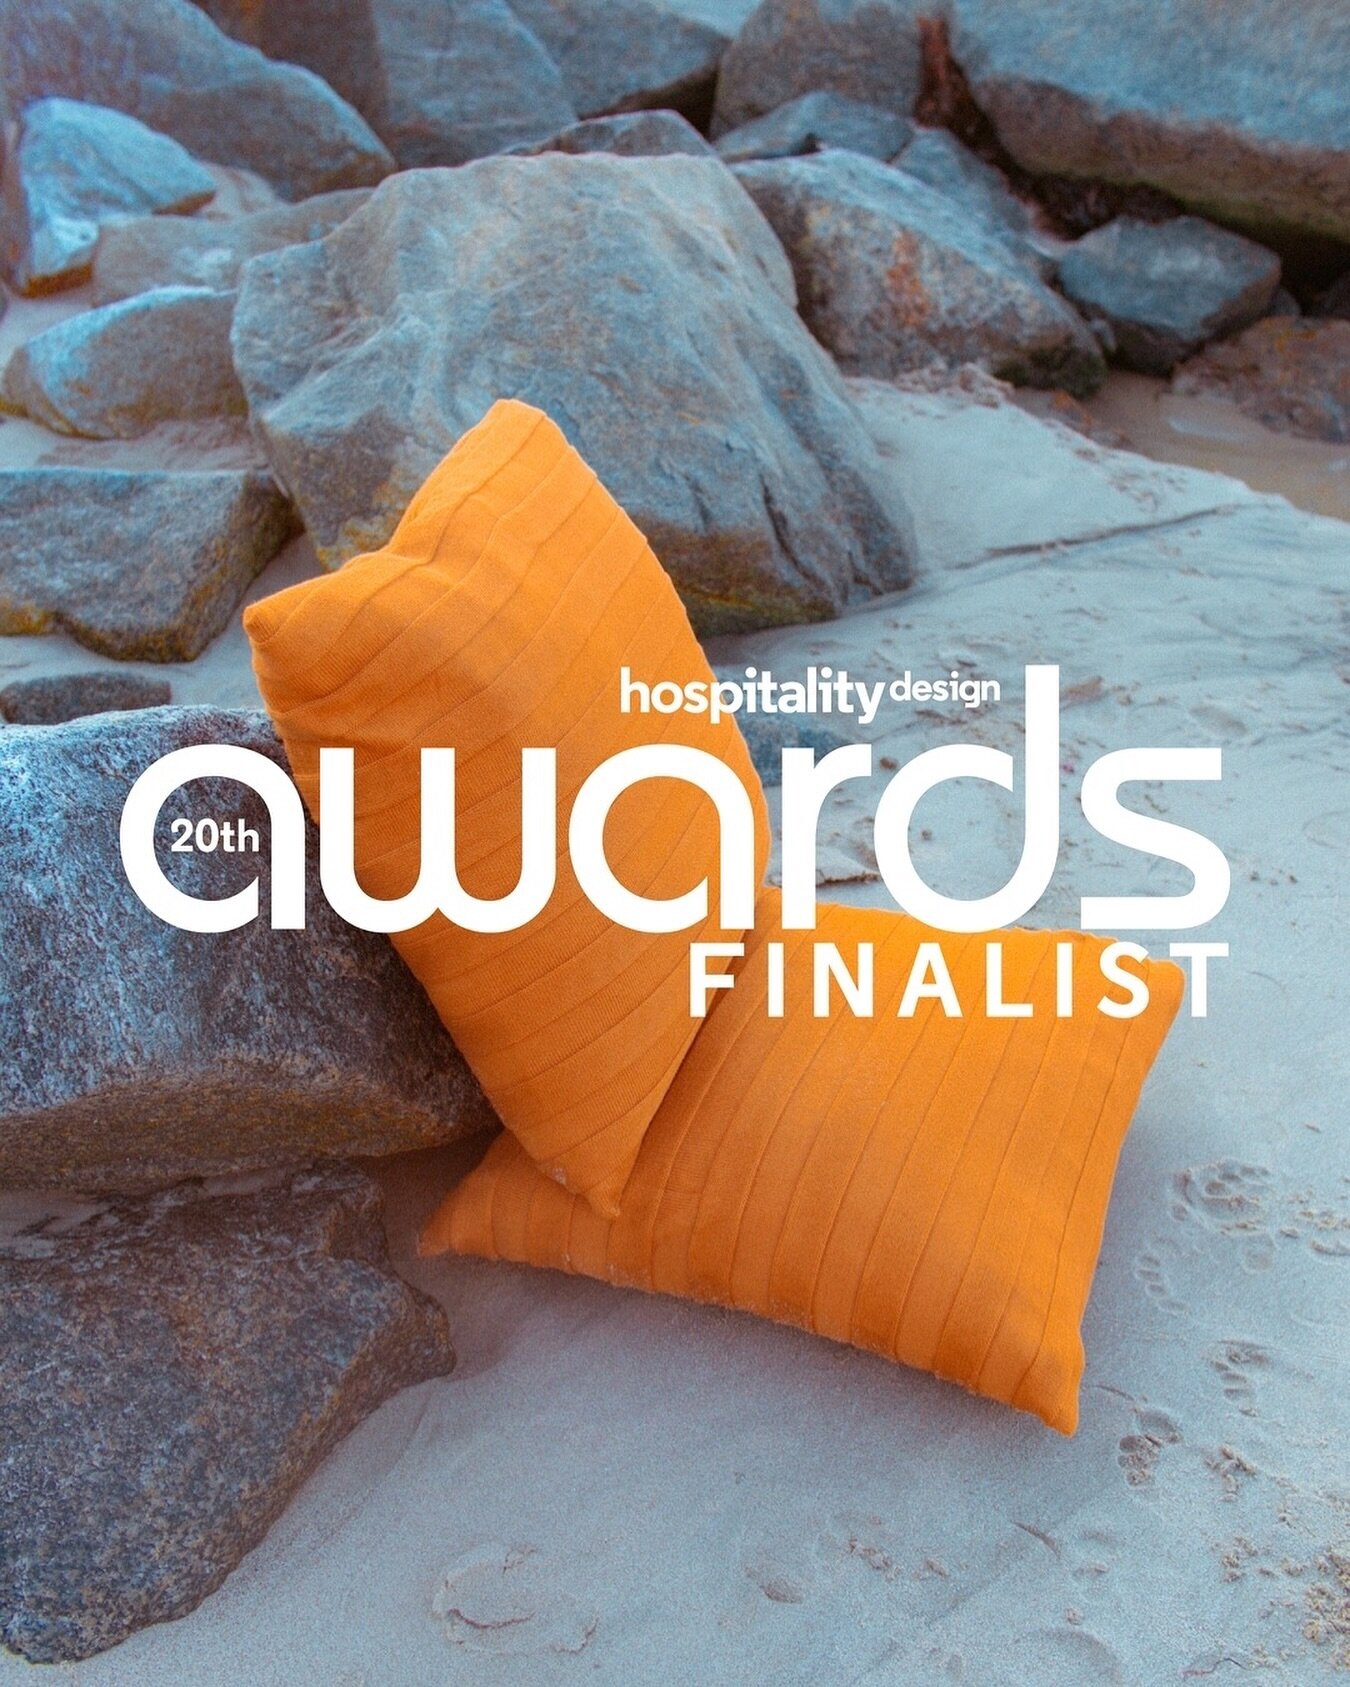 with more than 1,300 submissions and more than 375 entries, blaanks has been selected as a finalist in the sustainable solutions category for the 20th annual hd product awards.
⠀⠀⠀⠀⠀⠀⠀⠀⠀
add rich color to your outdoor design project made to order con